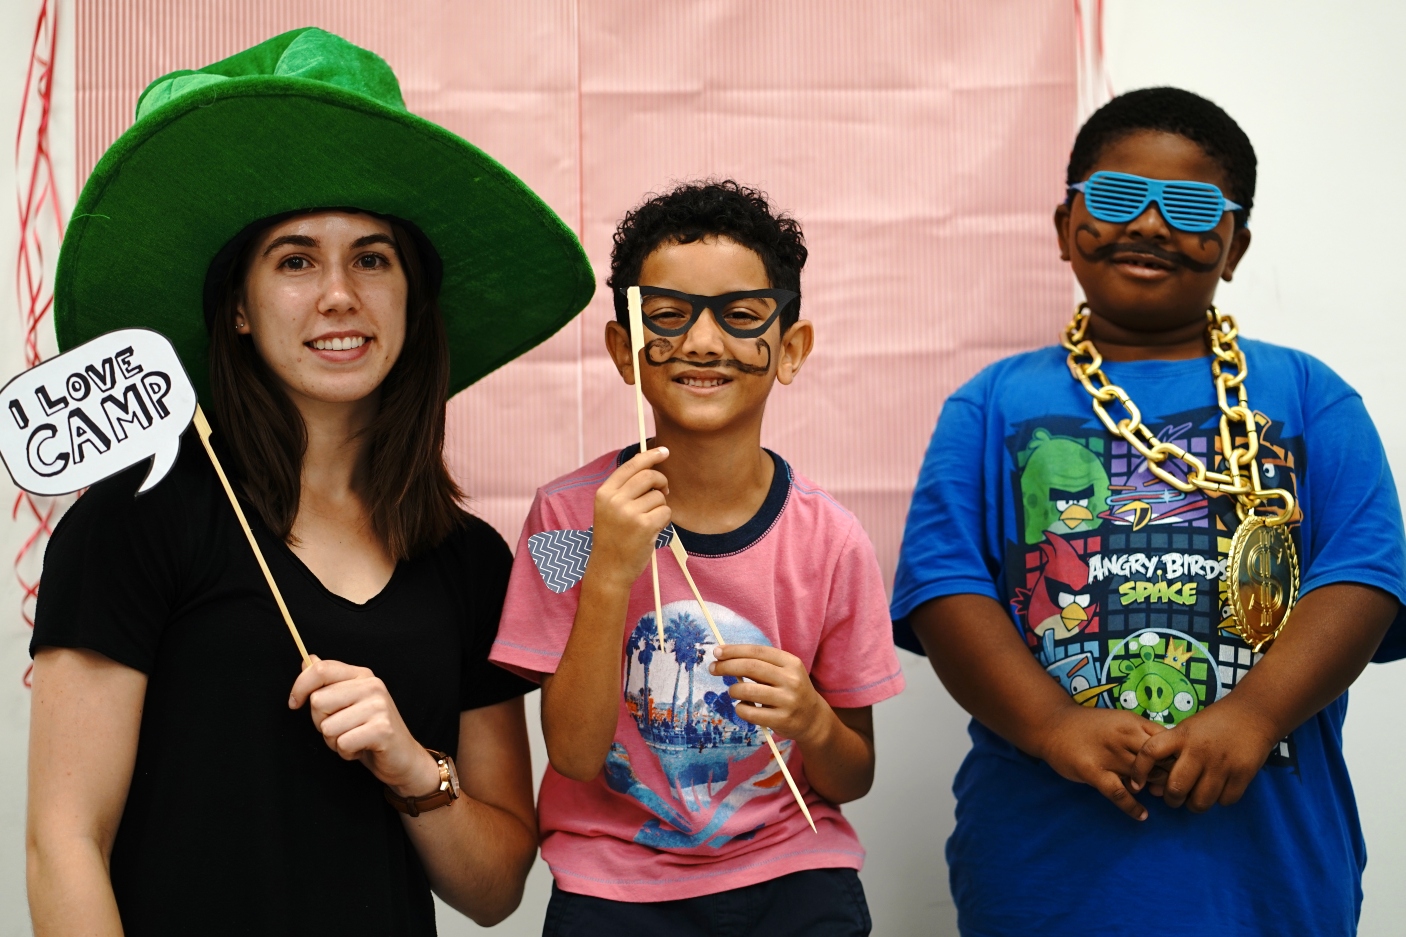 A camp counsellor and two campers wearing dress-up hats and glasses. The counsellor holds a sign that read, "I love camp."